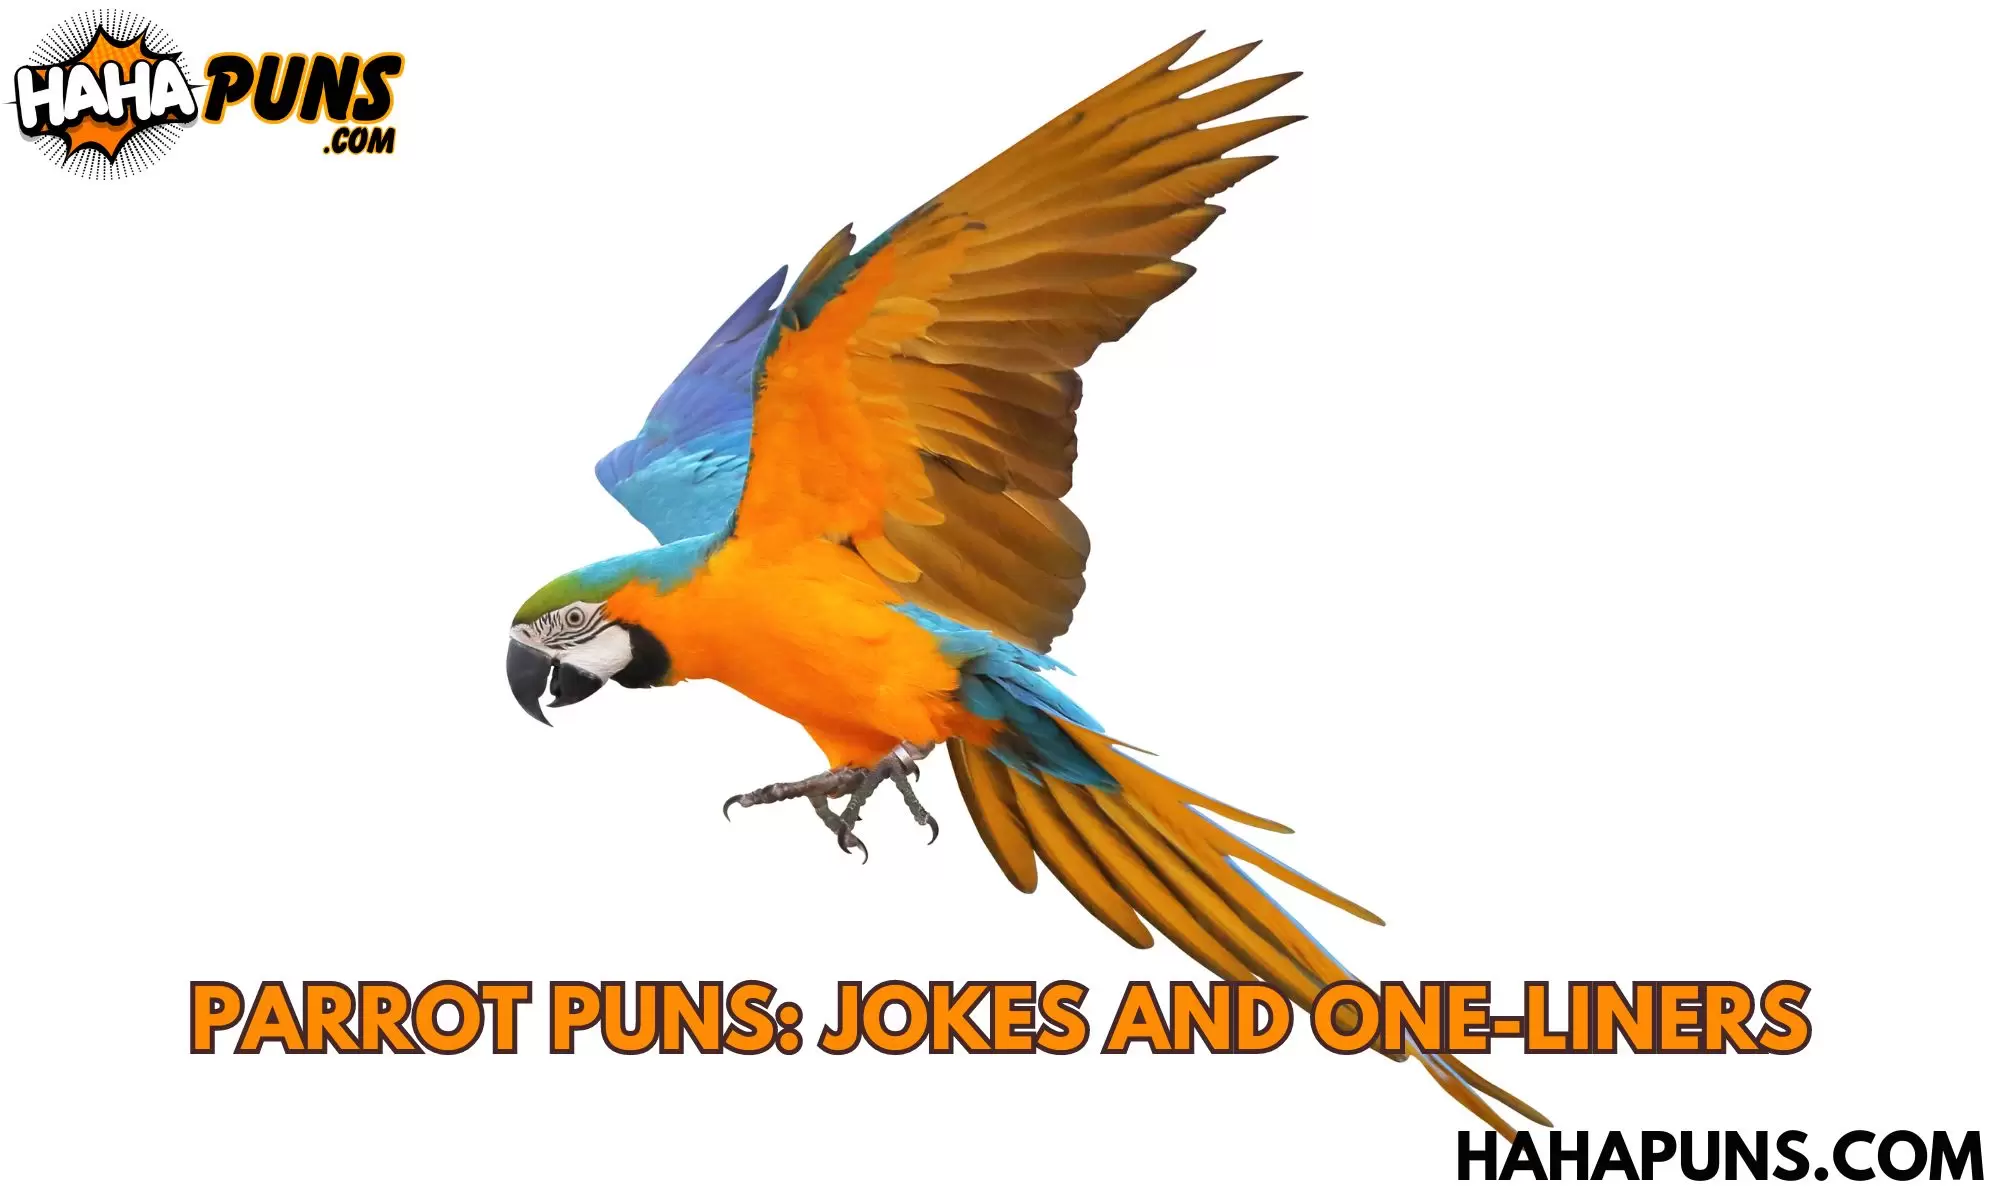 Parrot Puns: Jokes And One-Liners